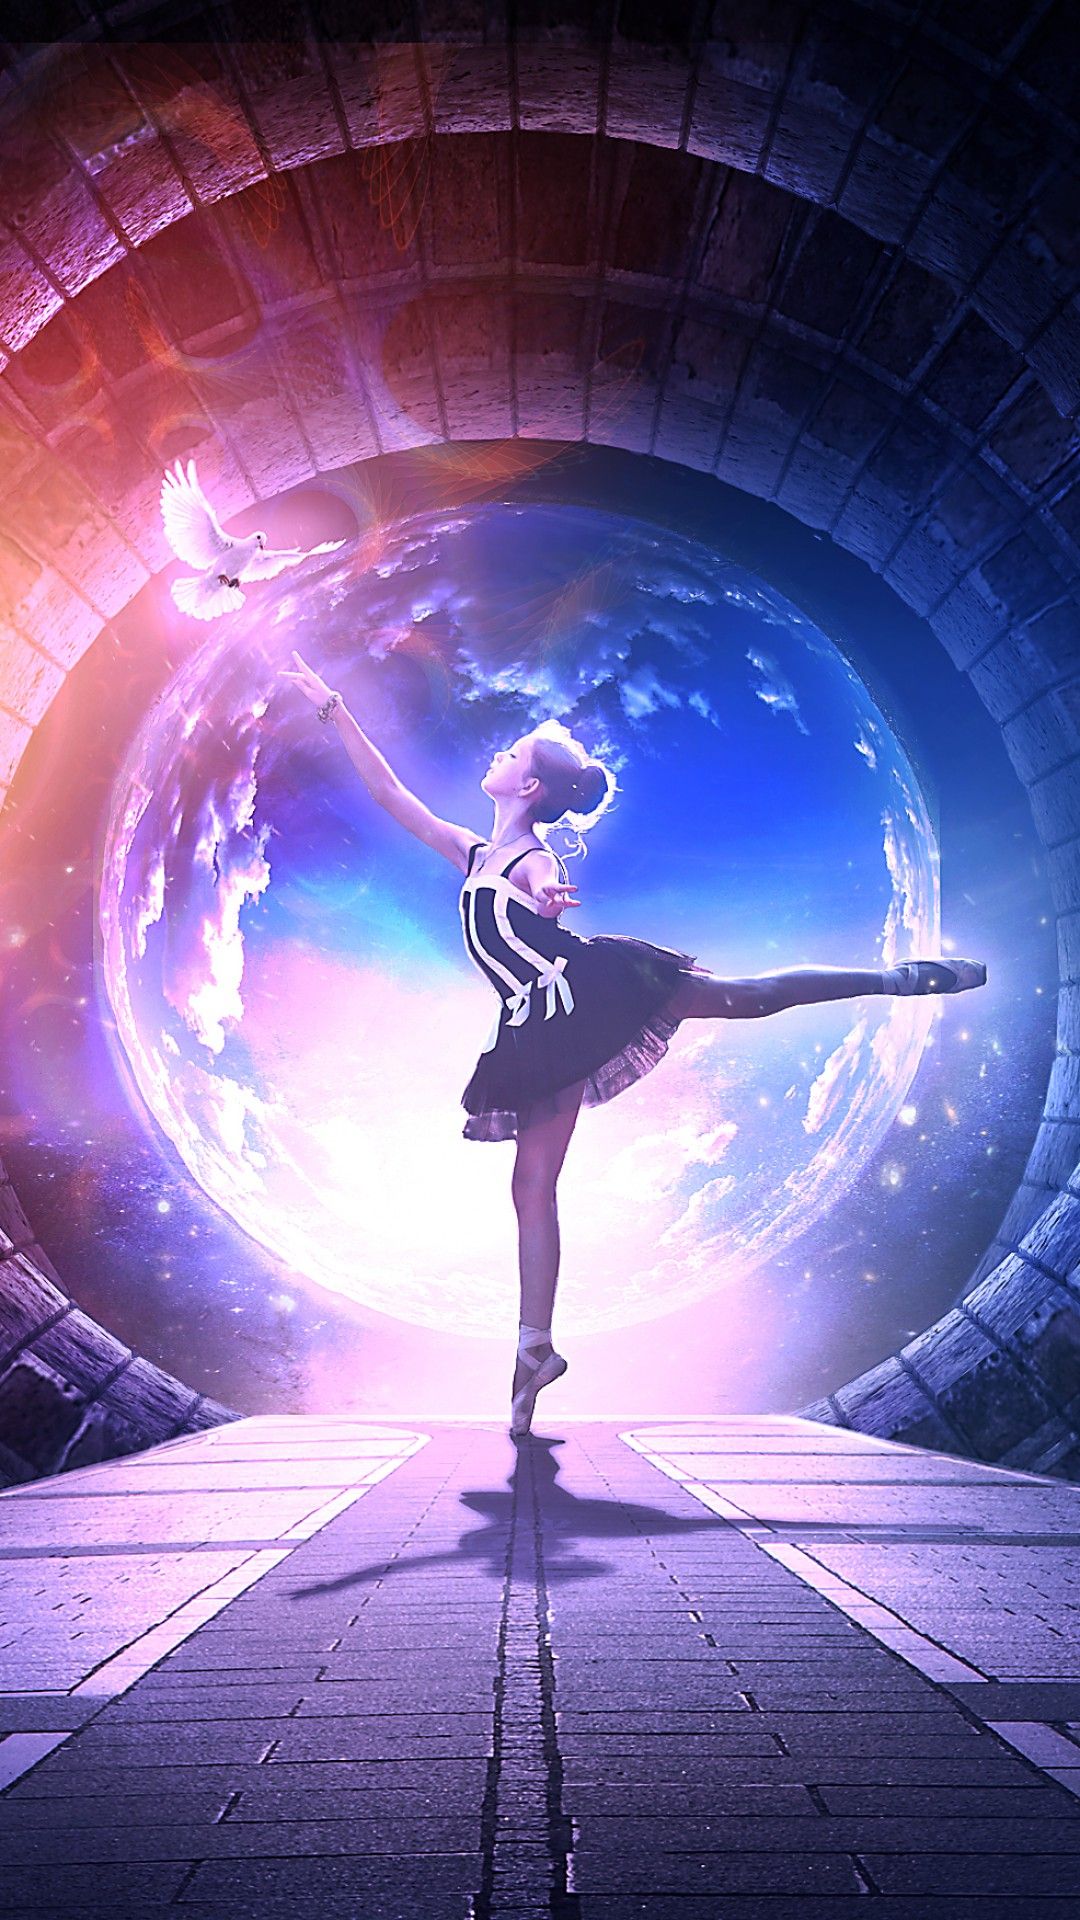 A ballerina in a futuristic setting, with a bird flying in front of a portal. - Dance